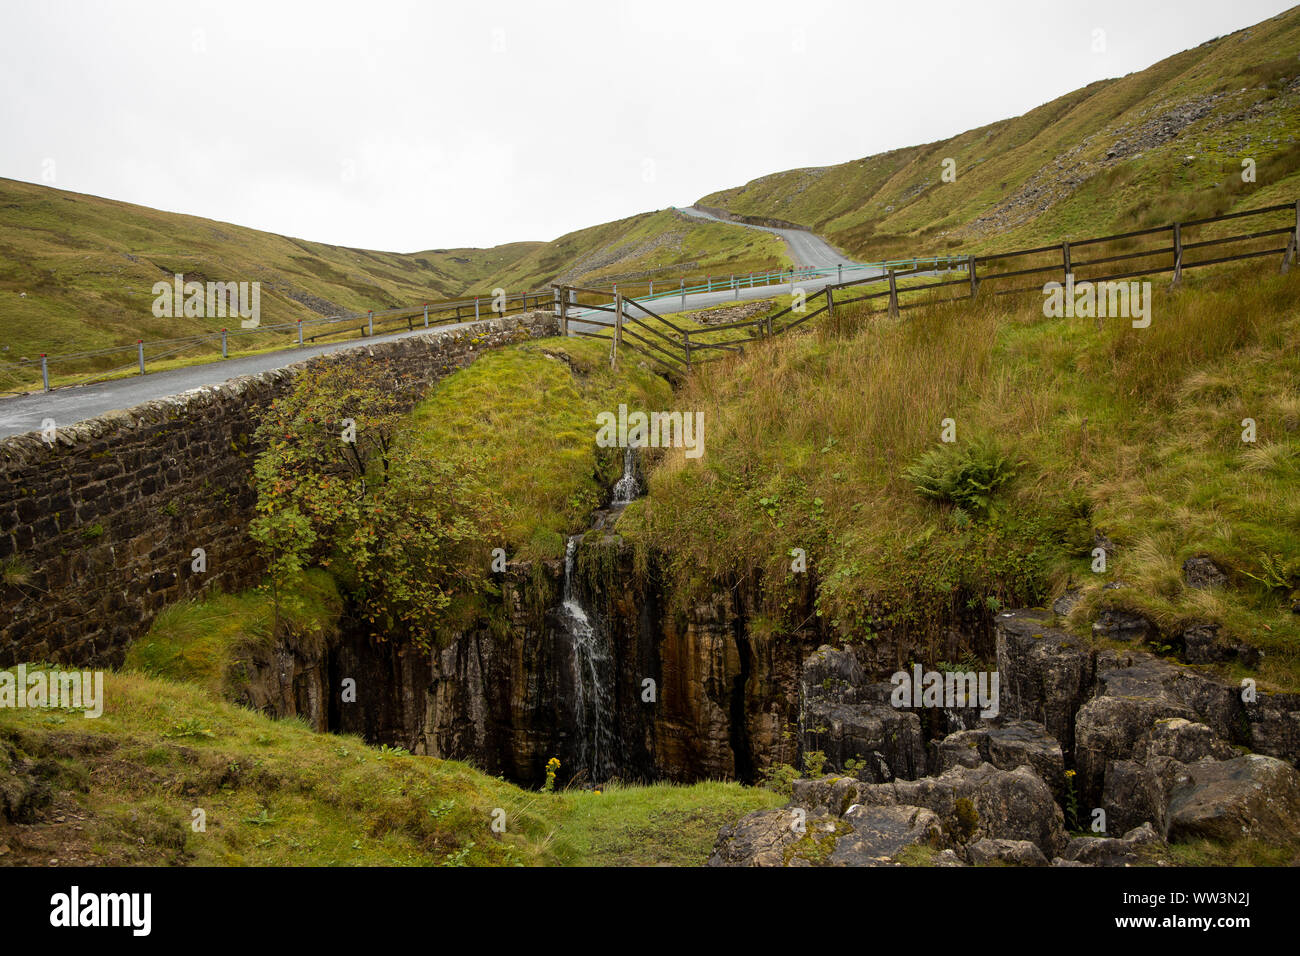 Buttertubs pass, Yorkshire Dales Foto Stock